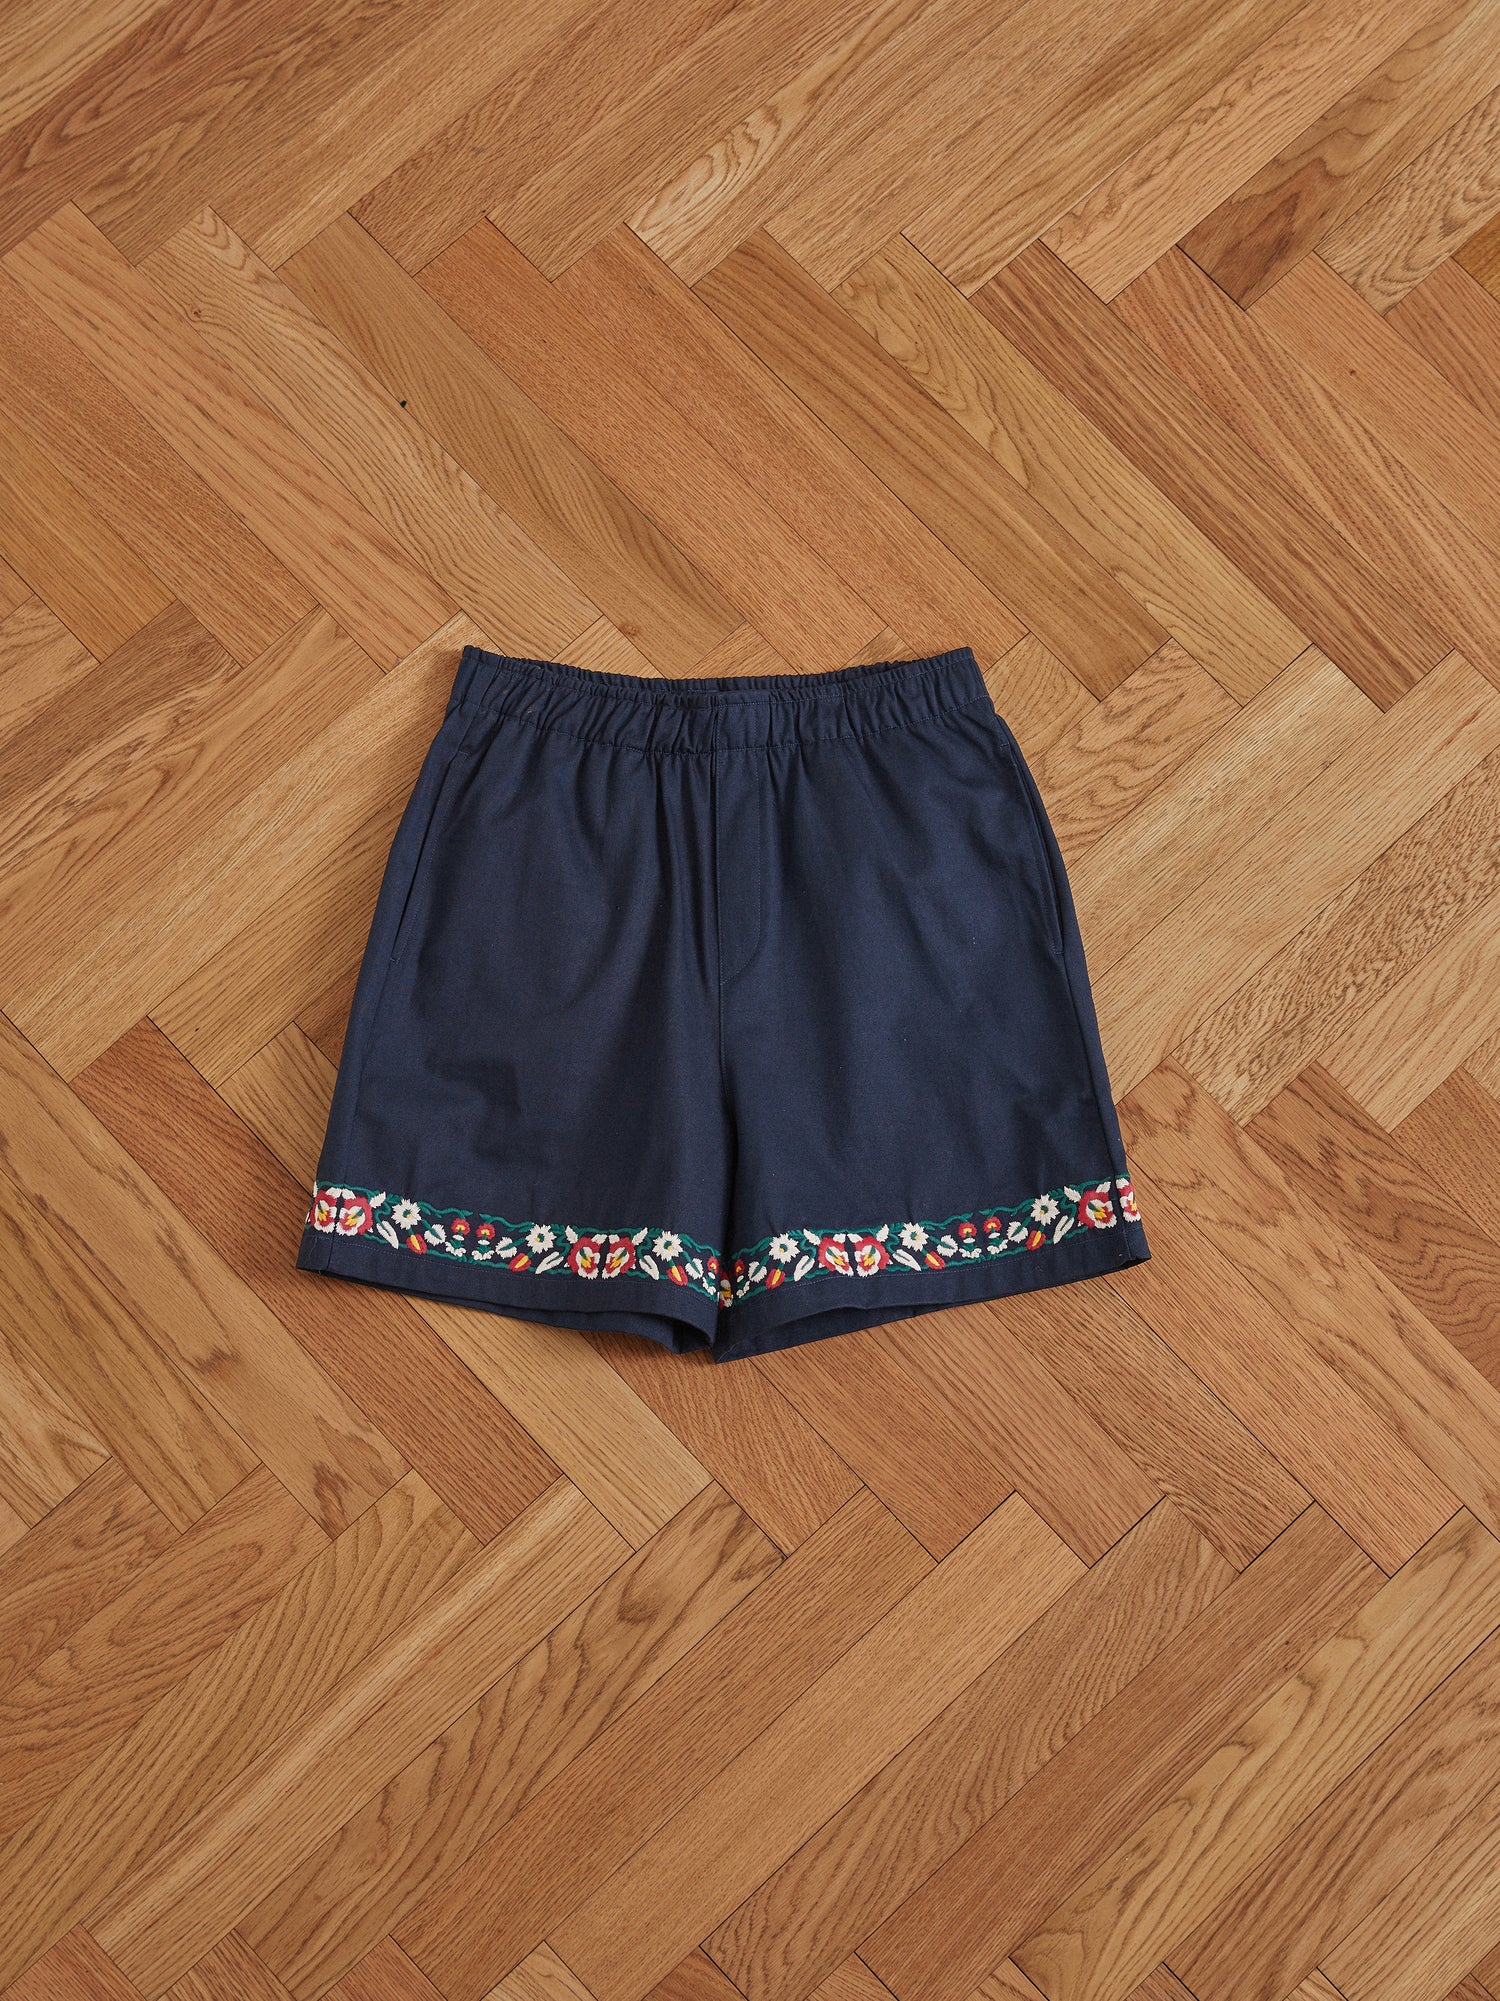 Found Navy blue Horse Equine Twill Shorts with colorful floral embroidery along the hem, lying flat on a herringbone patterned wooden floor.